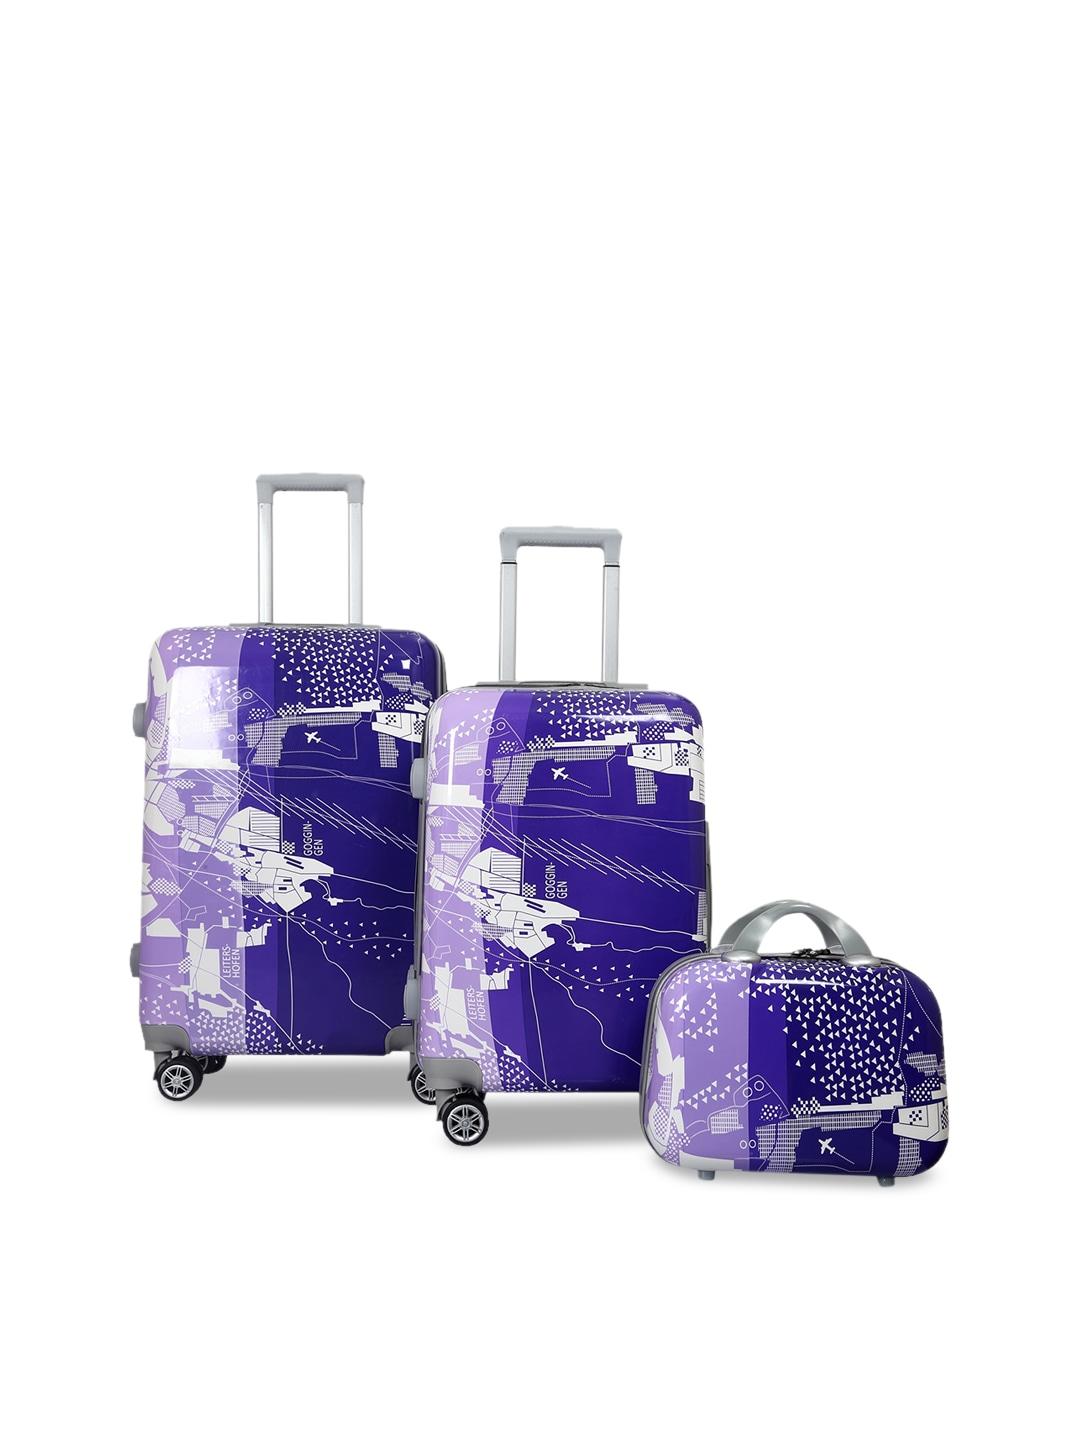 polo-class-set-of-3-printed-hard-case-luggage-trolley-&-vanity-bag